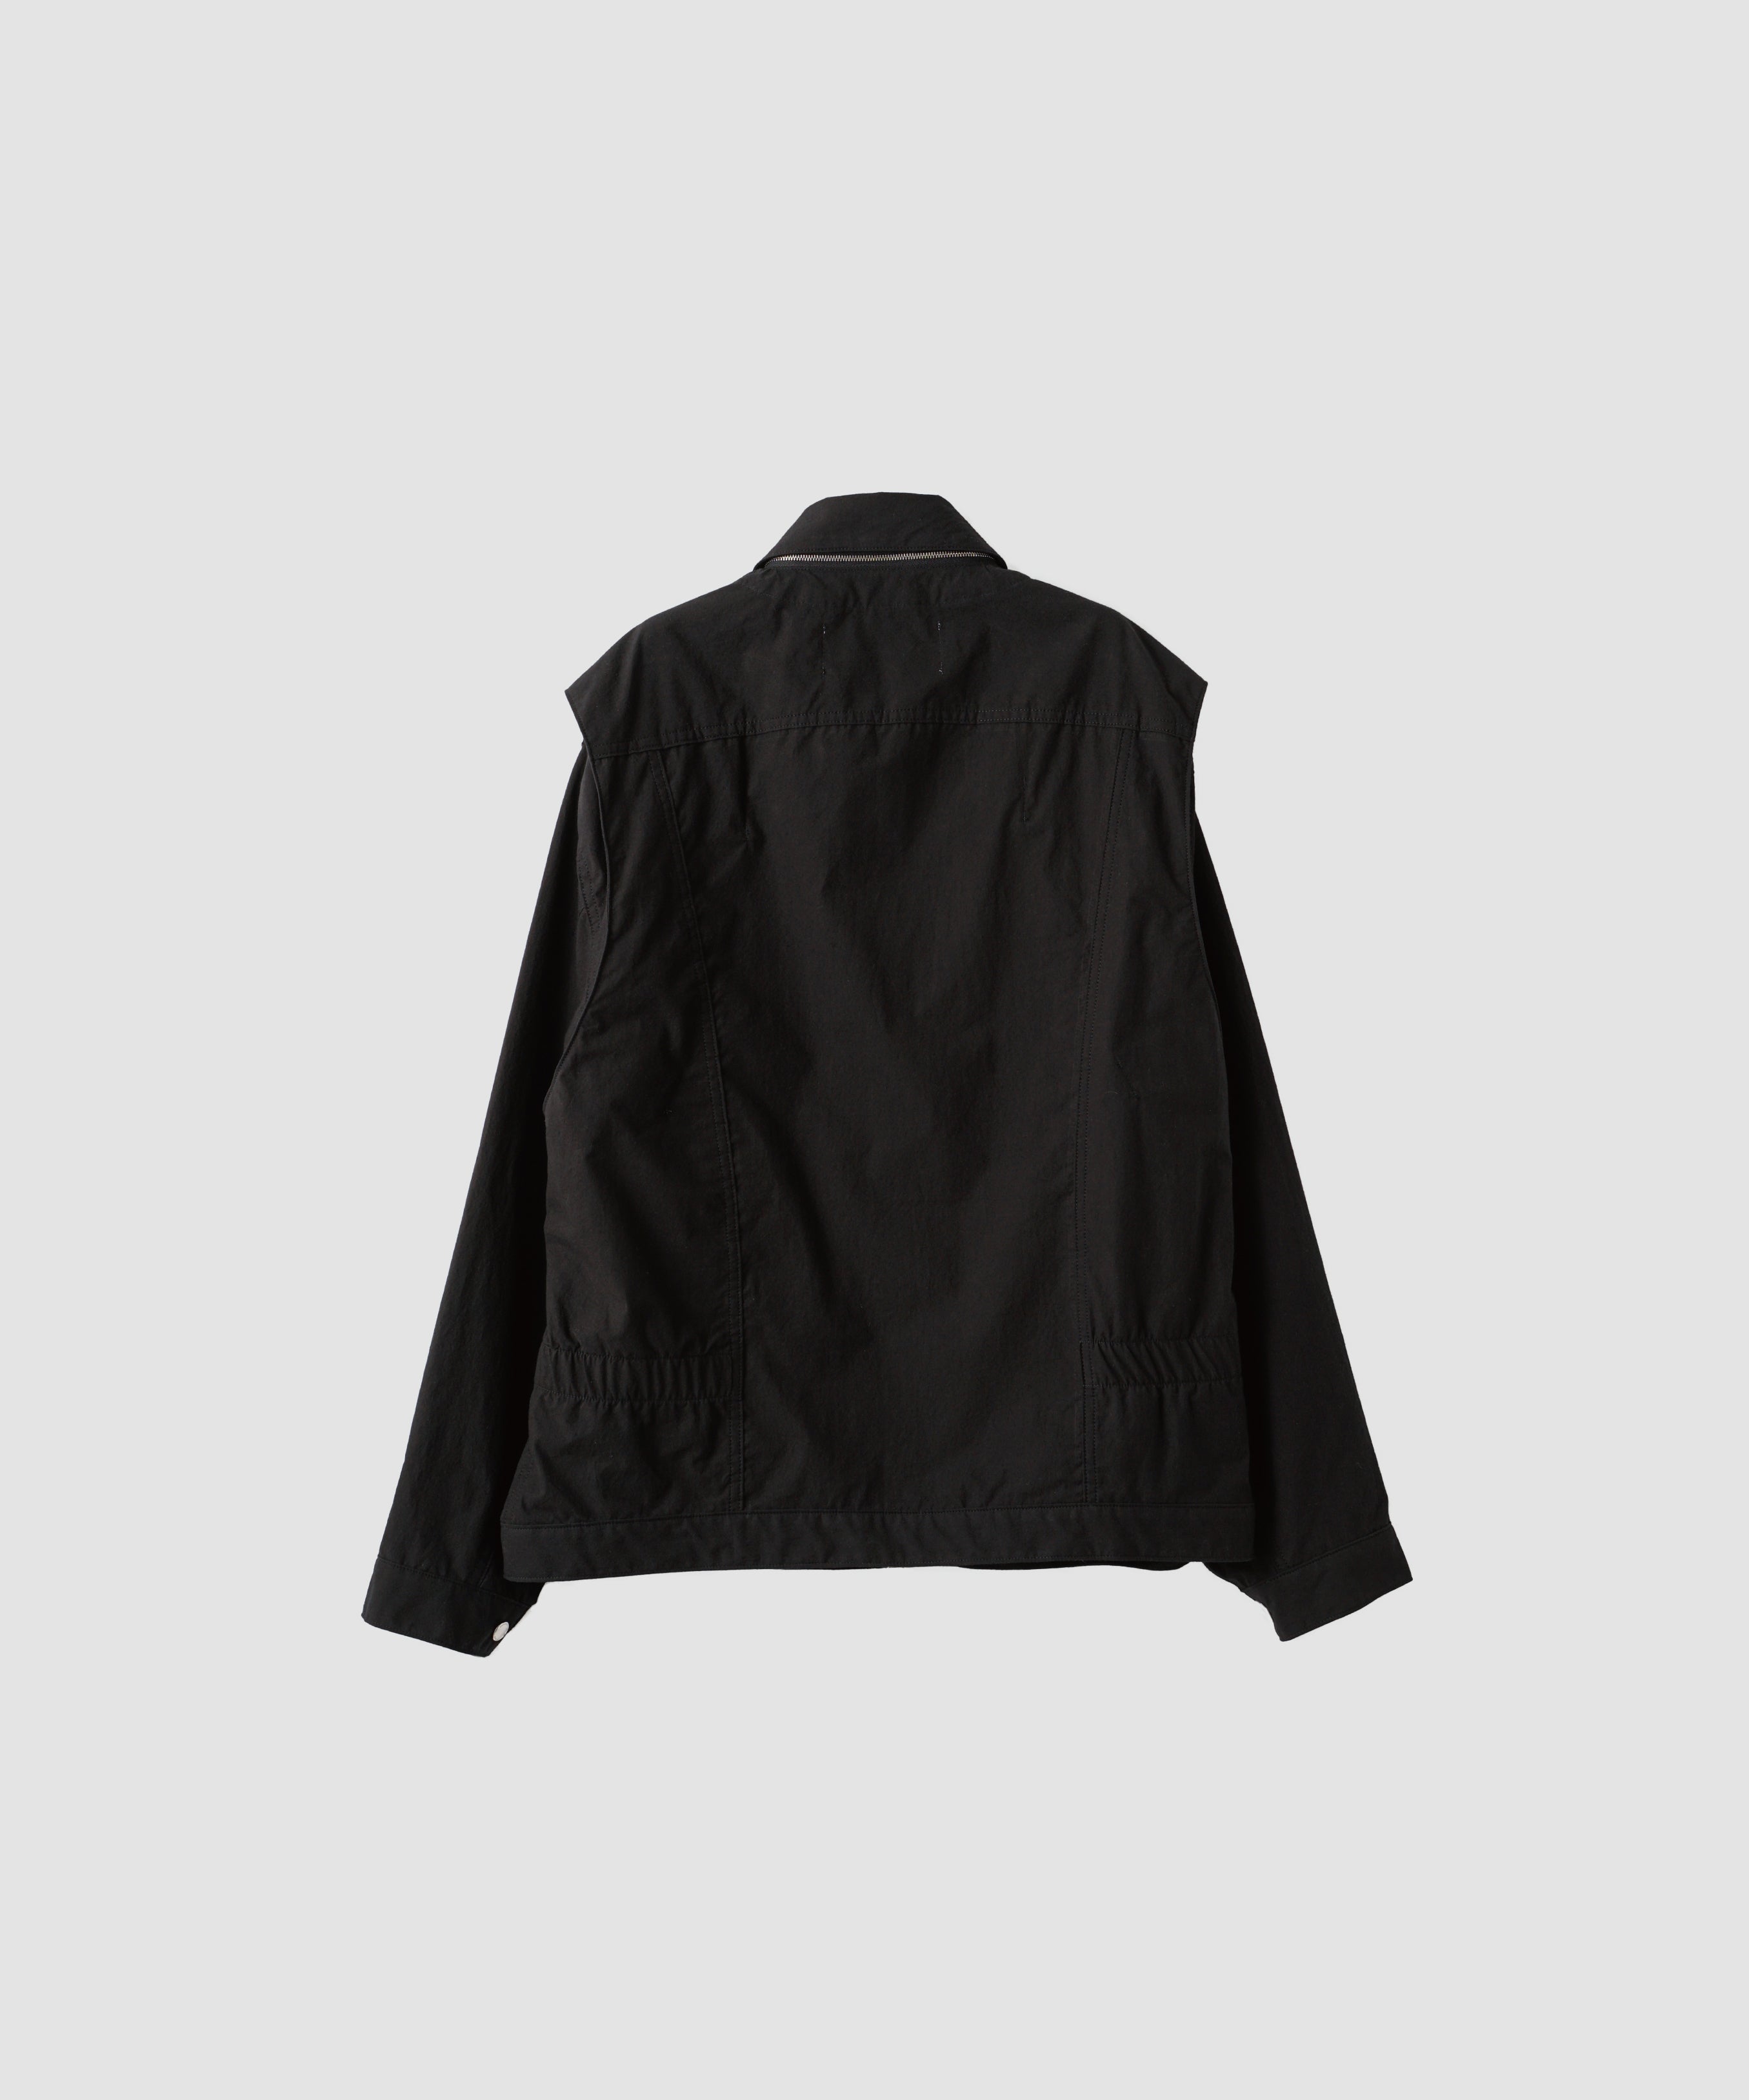 WASHED COTTON BROAD REMOVAL COLLAR TRUCKER JACKET